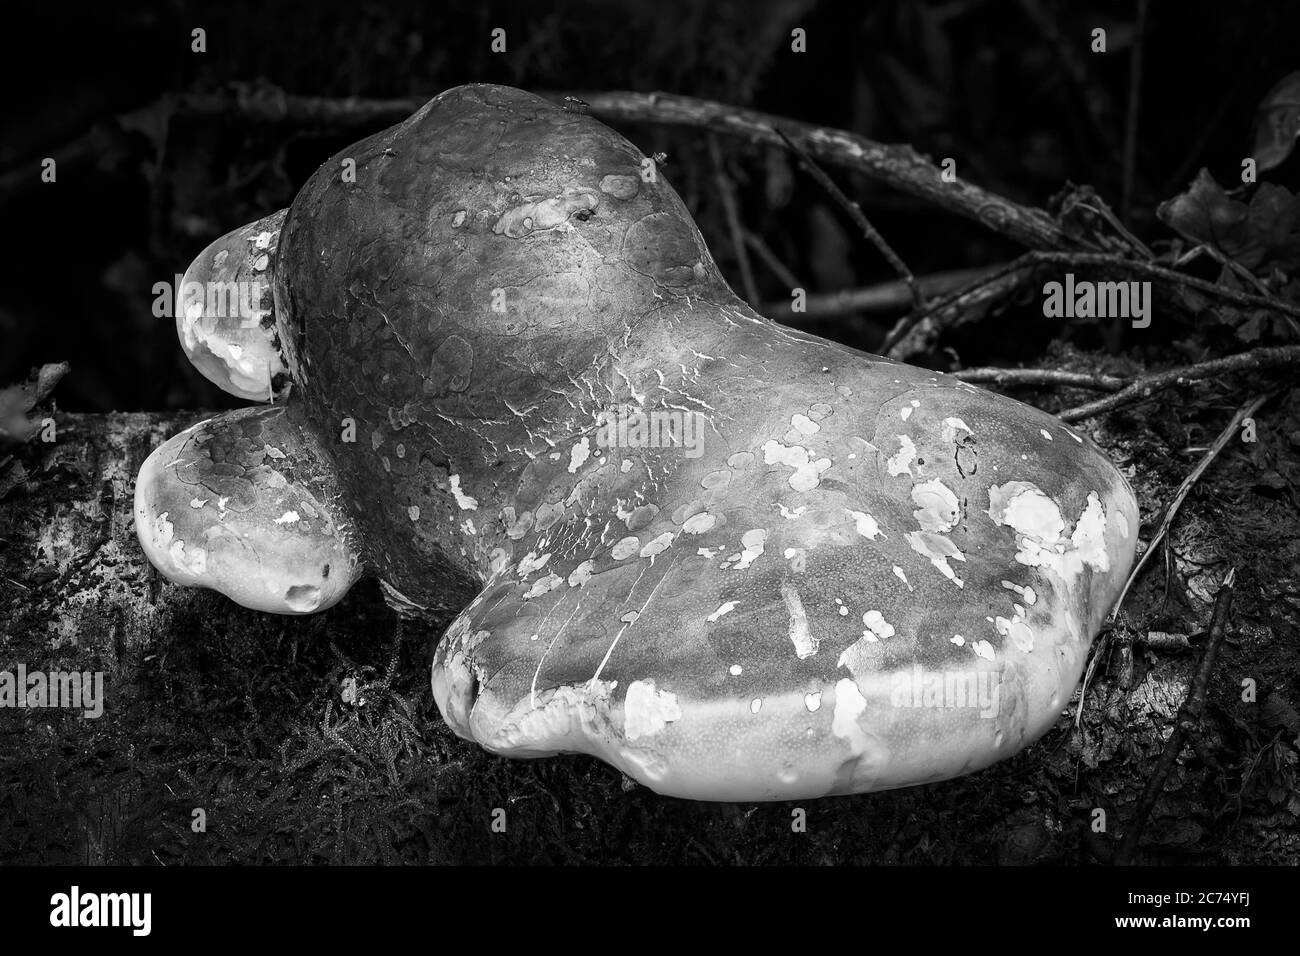 Bracket fungus fungi growing from a decaying tree trunk in the autumn fall black and white monochrome stock image Stock Photo